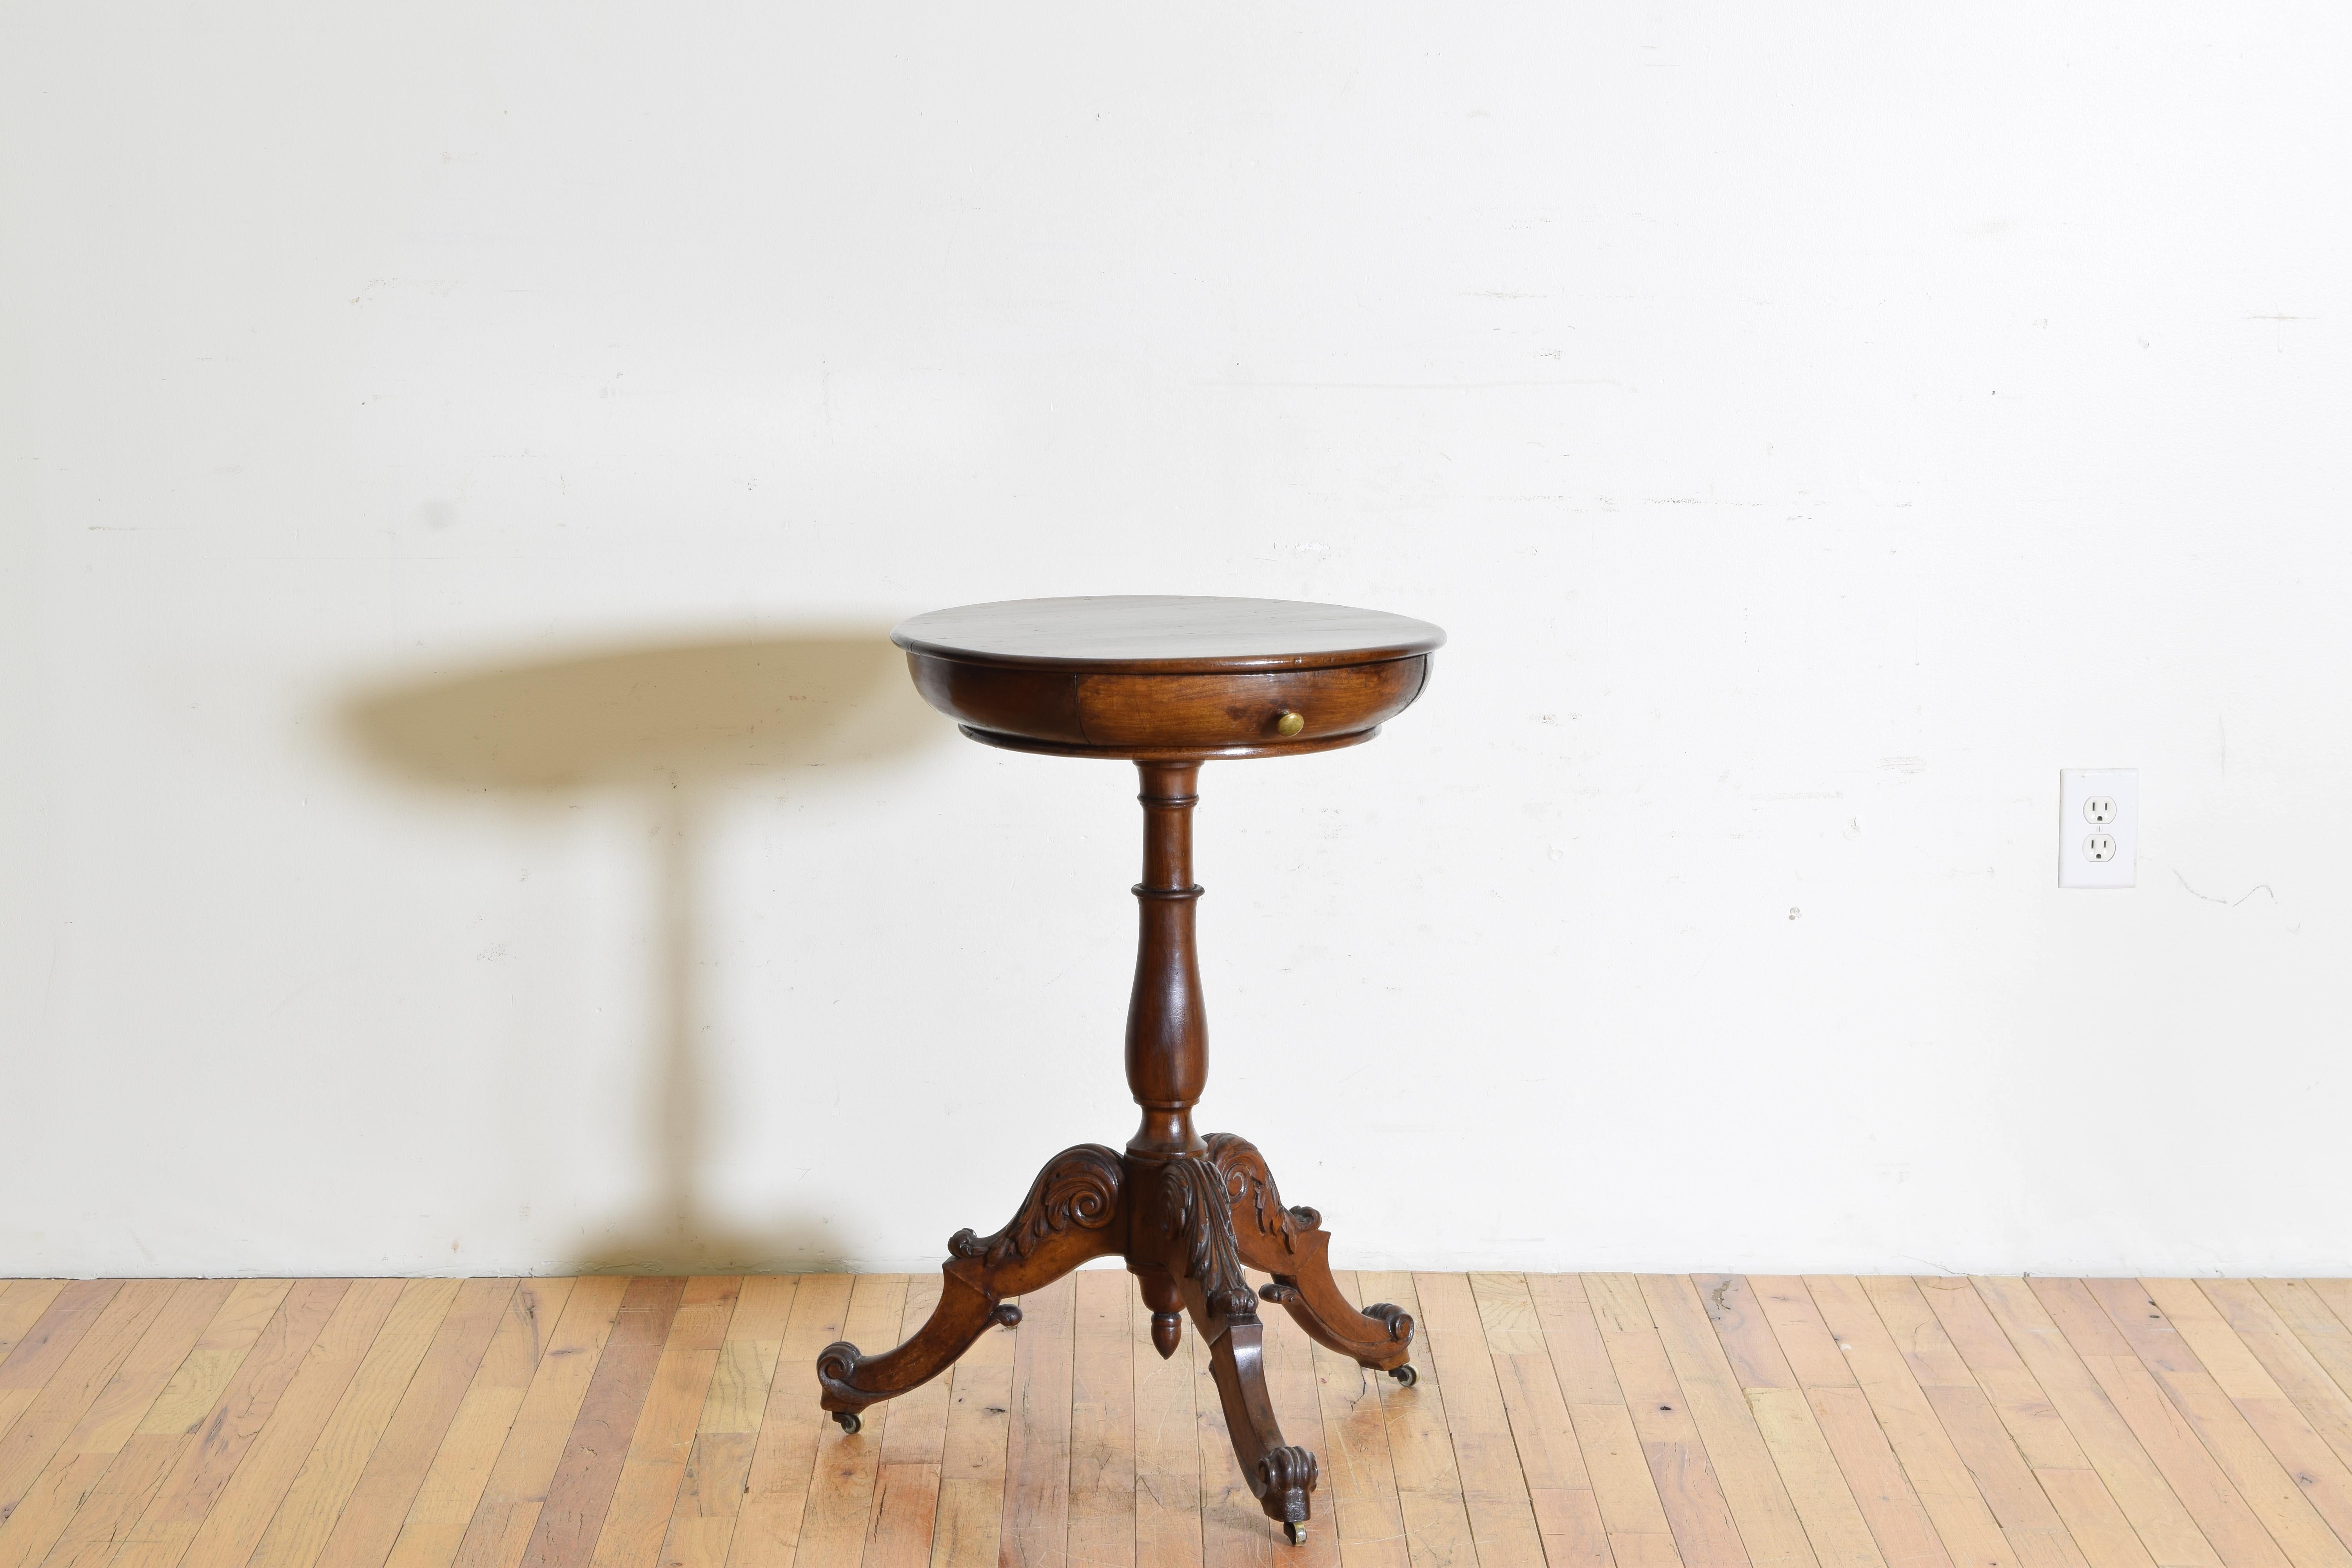 having a circular top of curved, almost bowl-like, design houisng one drawer, raised on a turned standard issuing three carved legs terminating in brass casters, with shaped central terminal.